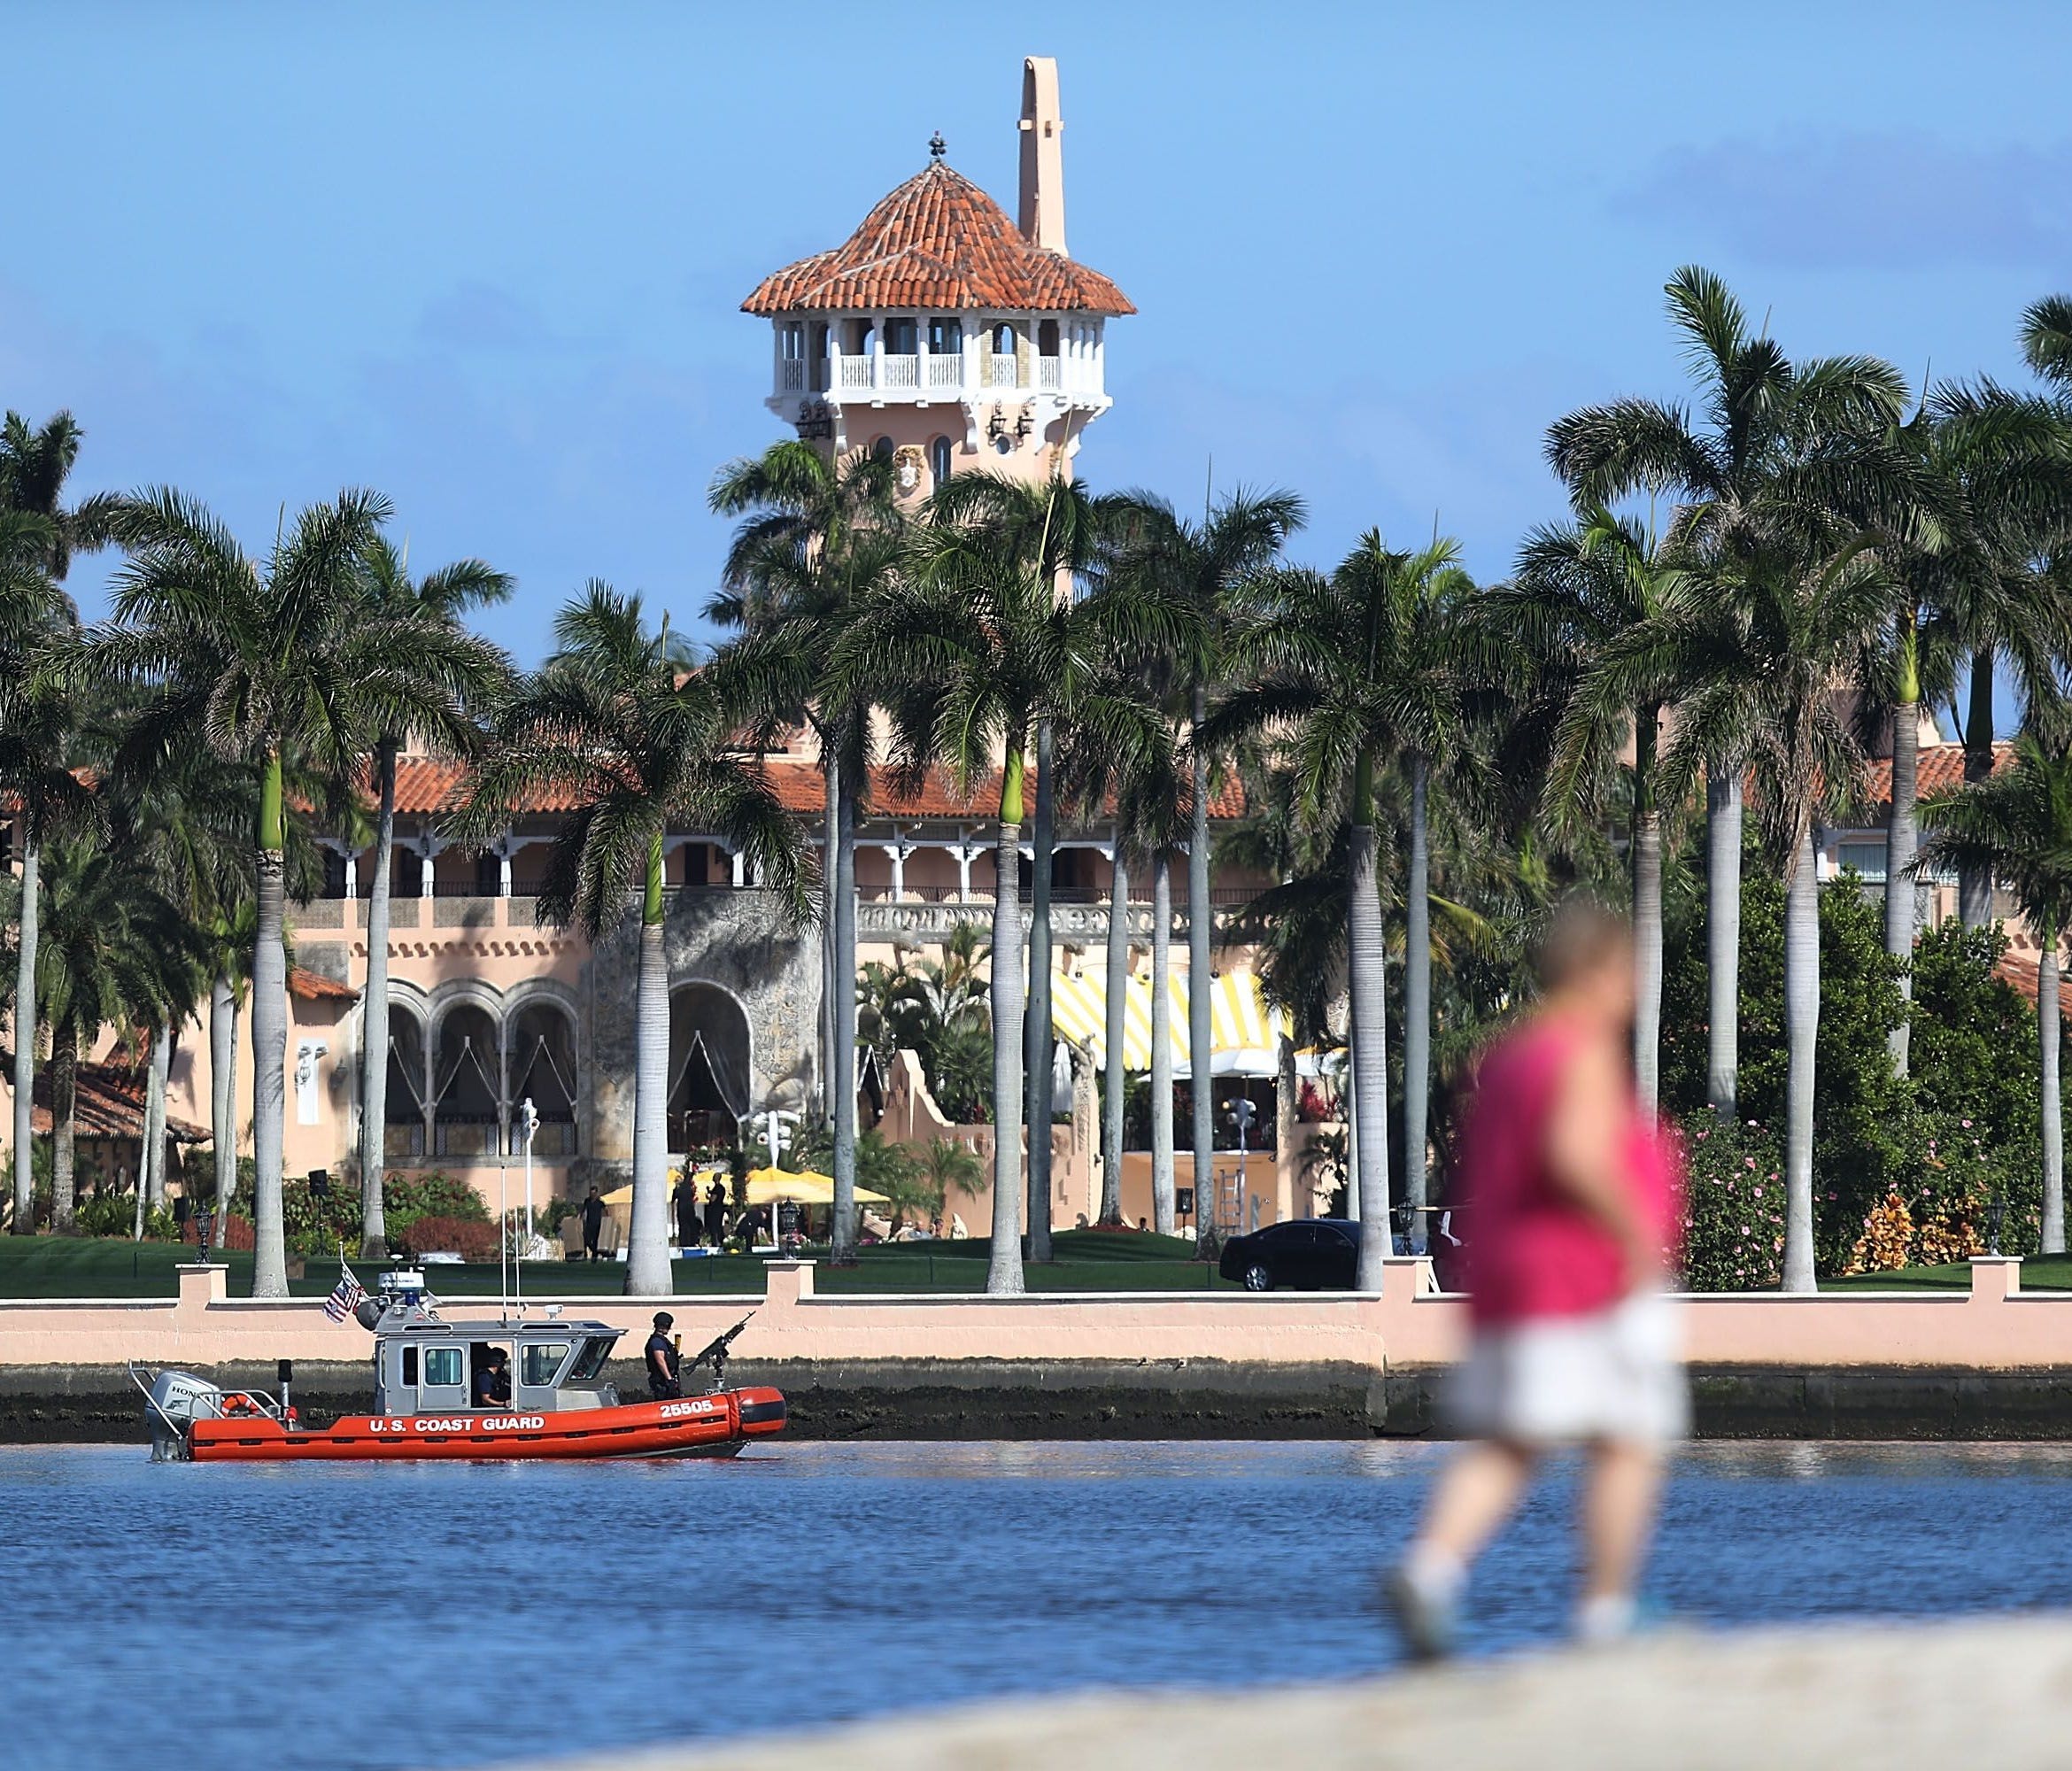 President Donald Trump has owned the Mar-a-Lago estate for decades. It is not being dubbed the 